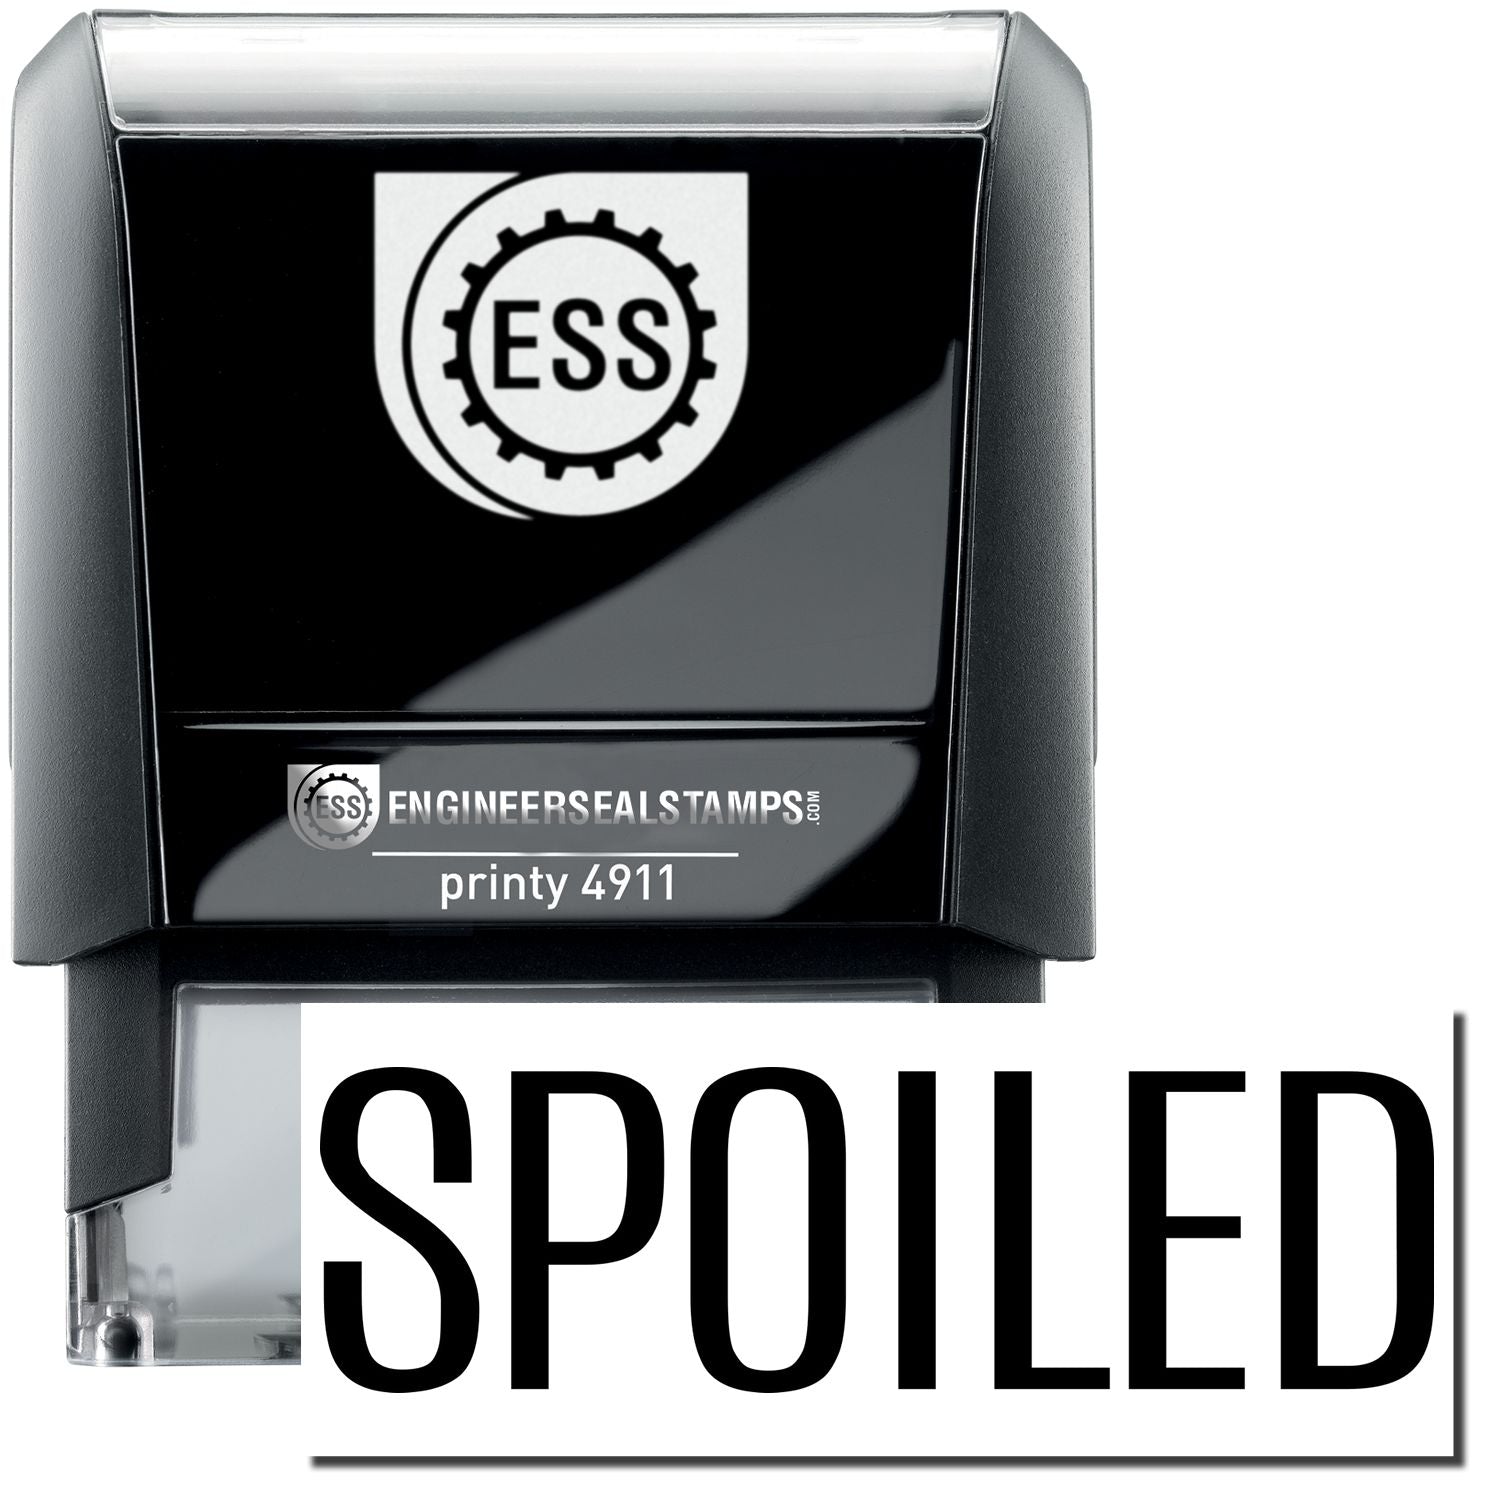 A self-inking stamp with a stamped image showing how the text "SPOILED" is displayed after stamping.